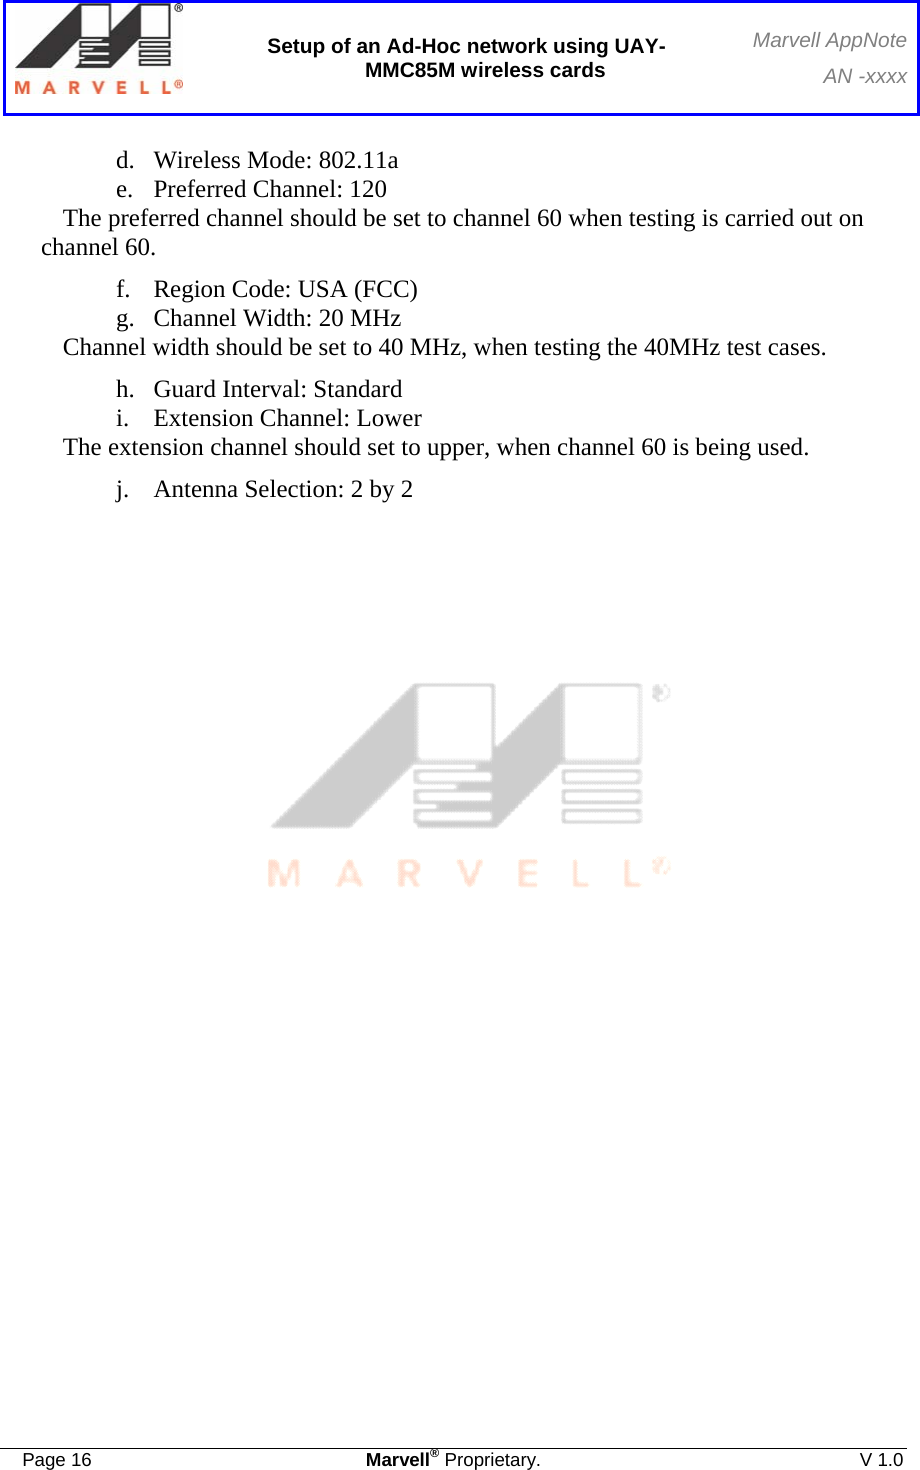  Setup of an Ad-Hoc network using UAY-MMC85M wireless cards Marvell AppNoteAN -xxxx  Page 16  Marvell® Proprietary.  V 1.0  d. Wireless Mode: 802.11a e. Preferred Channel: 120 The preferred channel should be set to channel 60 when testing is carried out on channel 60. f. Region Code: USA (FCC) g. Channel Width: 20 MHz Channel width should be set to 40 MHz, when testing the 40MHz test cases. h. Guard Interval: Standard i. Extension Channel: Lower The extension channel should set to upper, when channel 60 is being used. j. Antenna Selection: 2 by 2      